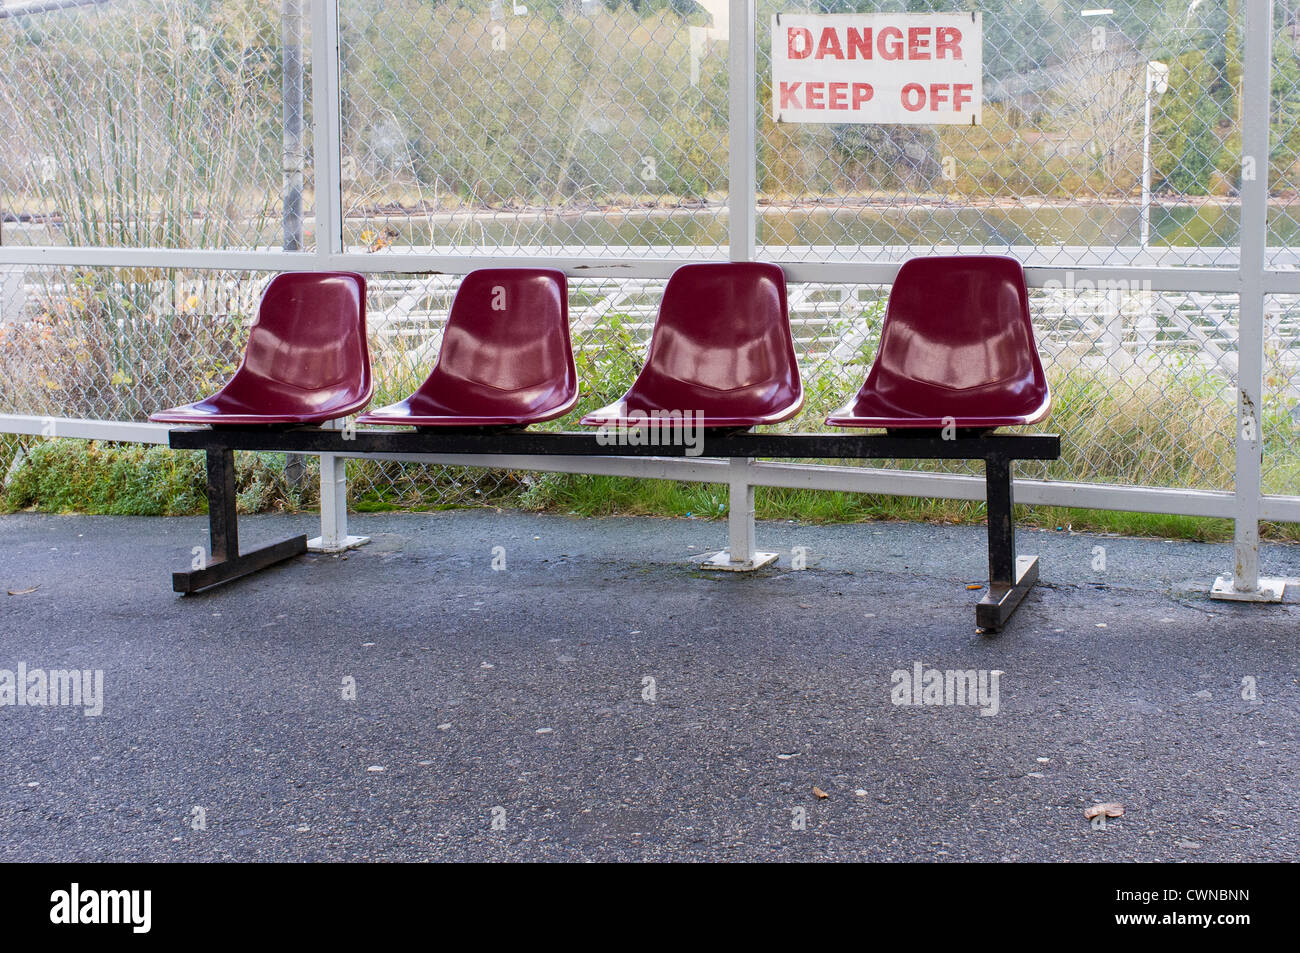 Seats in waiting area with a danger keep off sign. Stock Photo